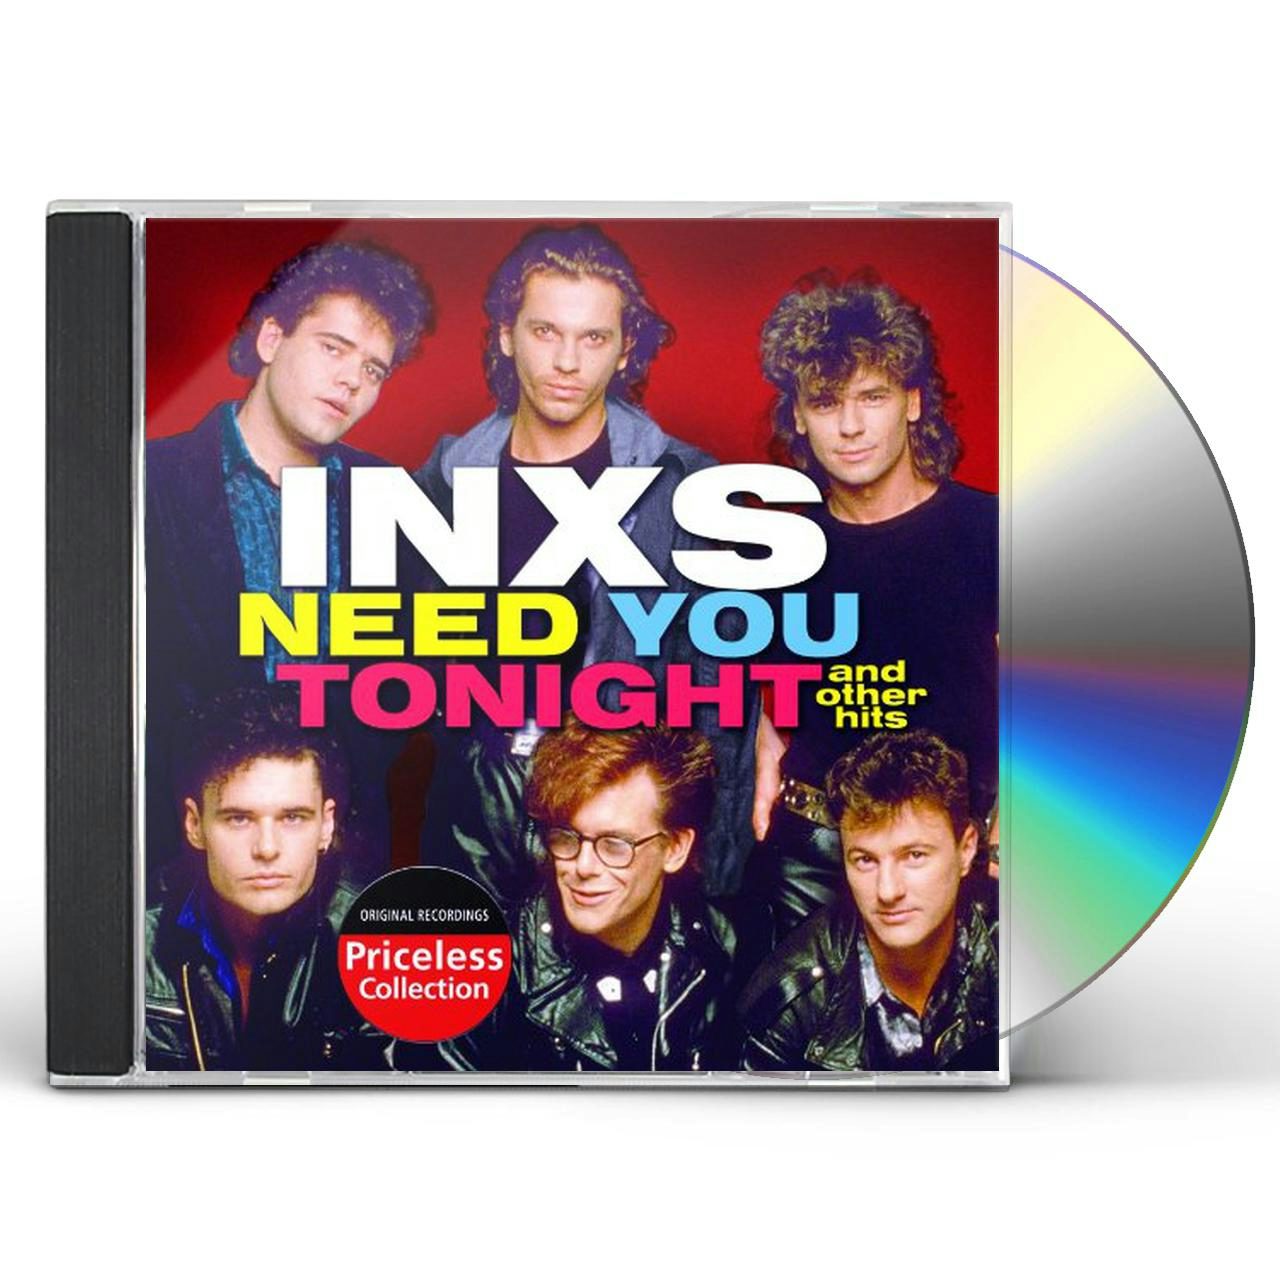 inxs need you tonight & other hits cd $8.99$7.99